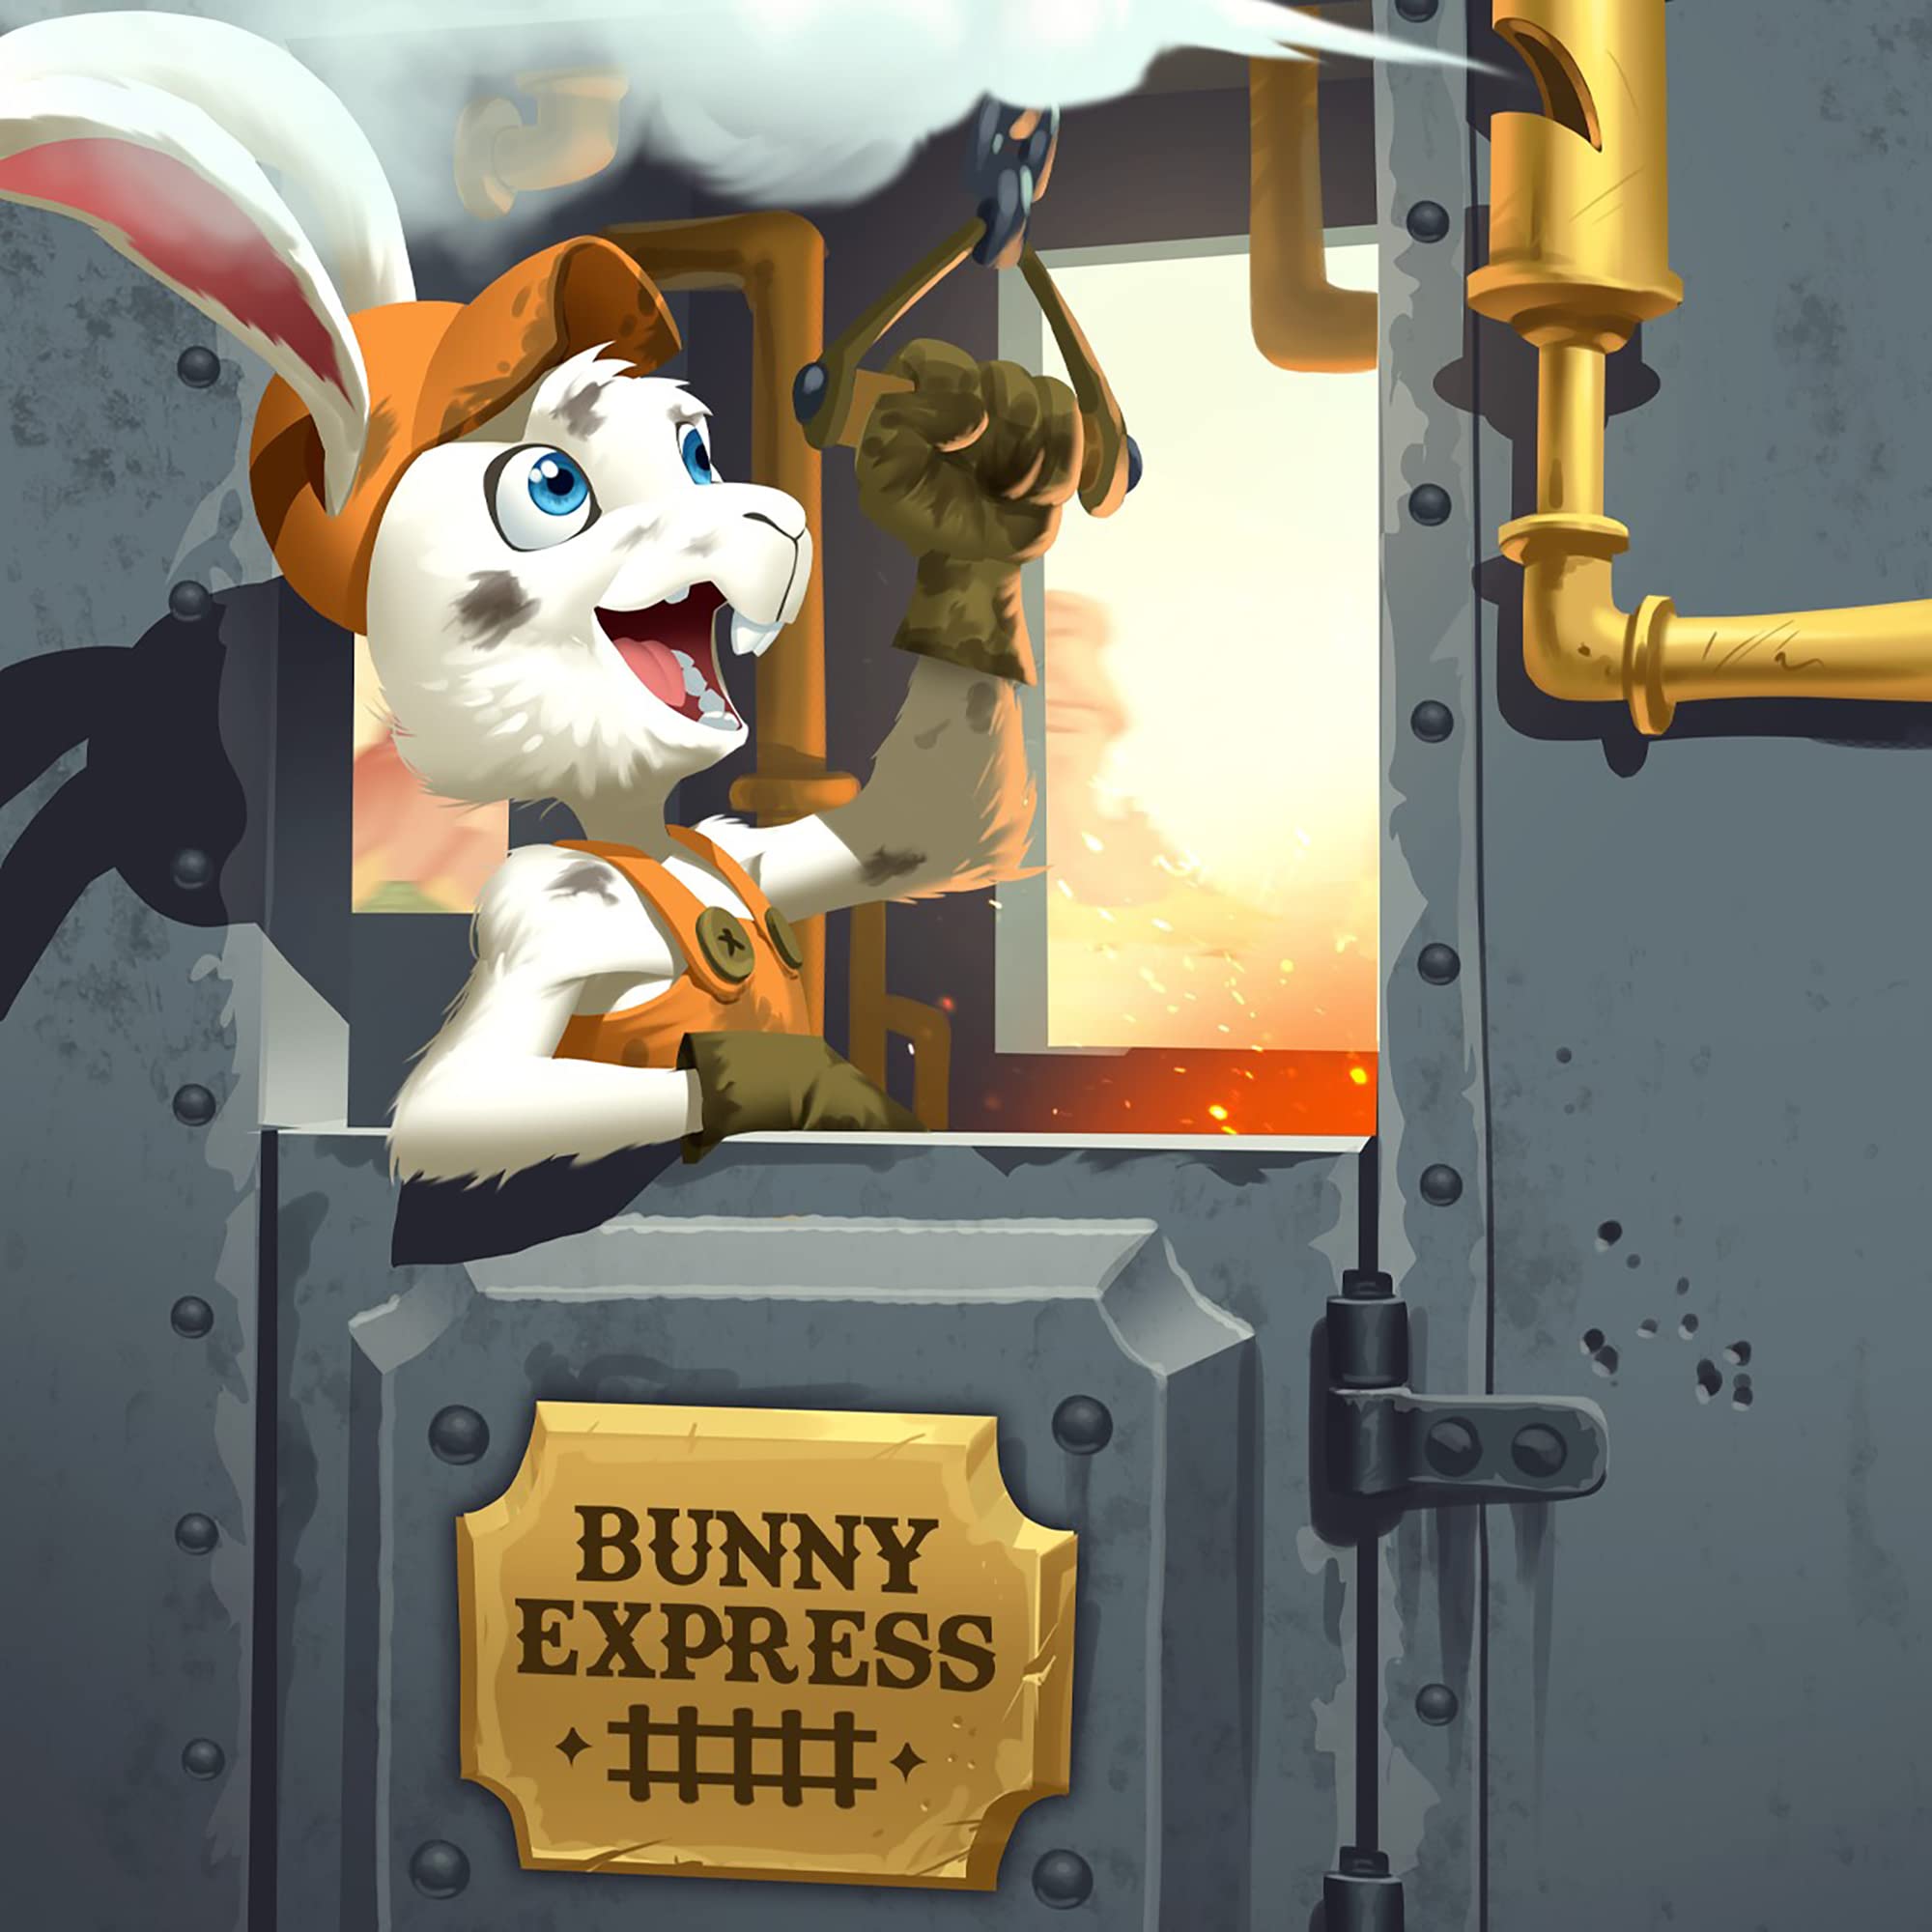 IELLO Bunny Kingdom: Bunny Express Micro Expansion - Iello, Card Game Expansion to Play with Bunny Kingdom Base Game